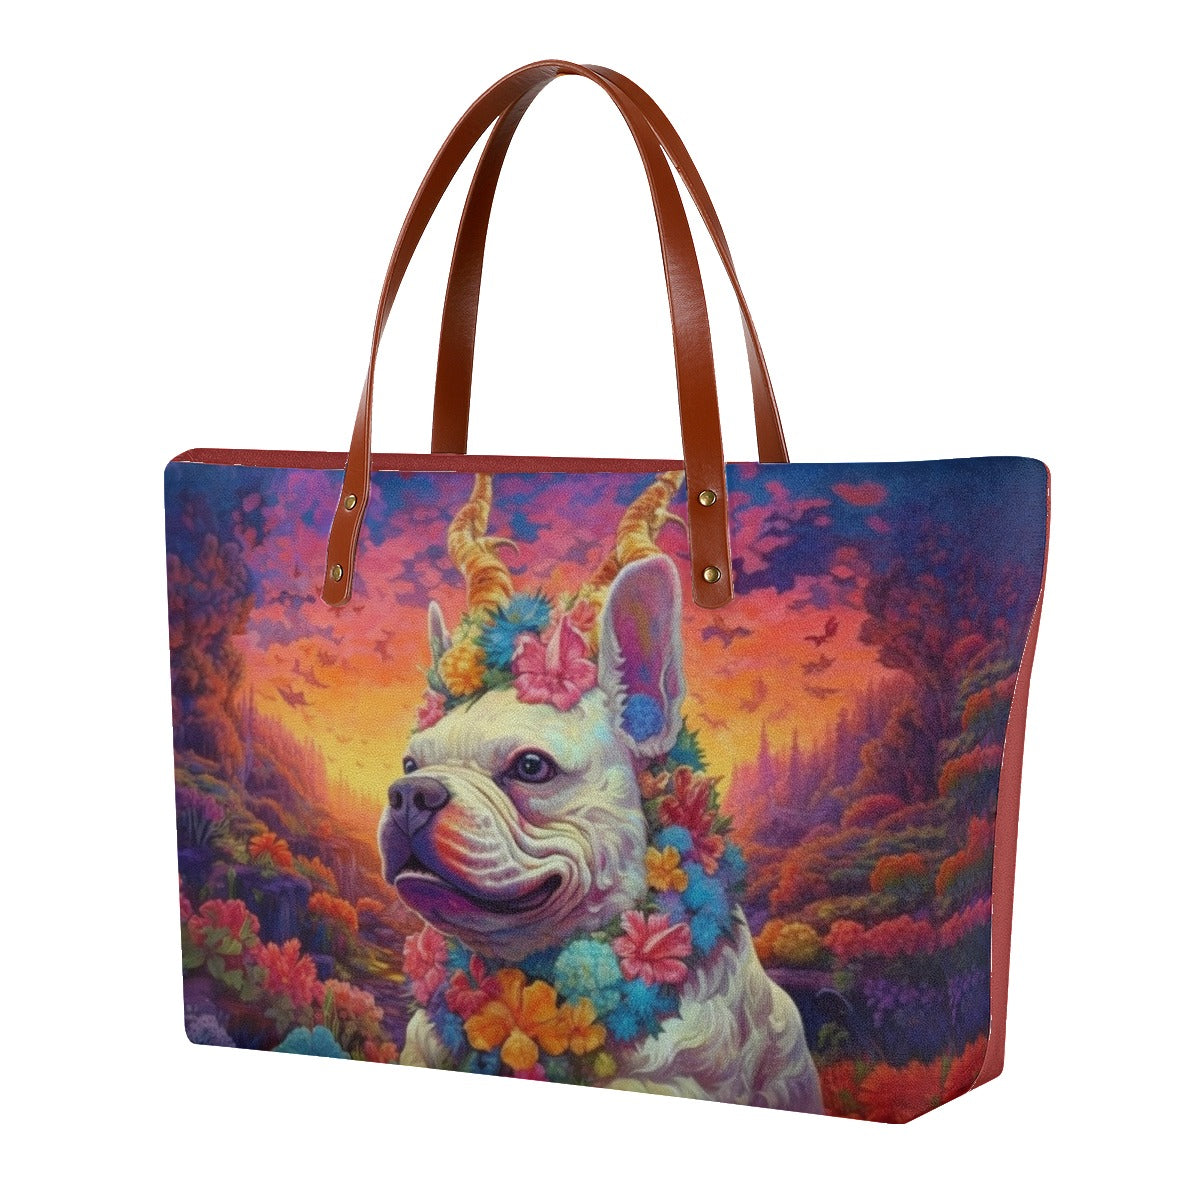 Unicorn Frenchie Women's Tote Bag - Magical and Spacious Addition for Frenchie Enthusiasts